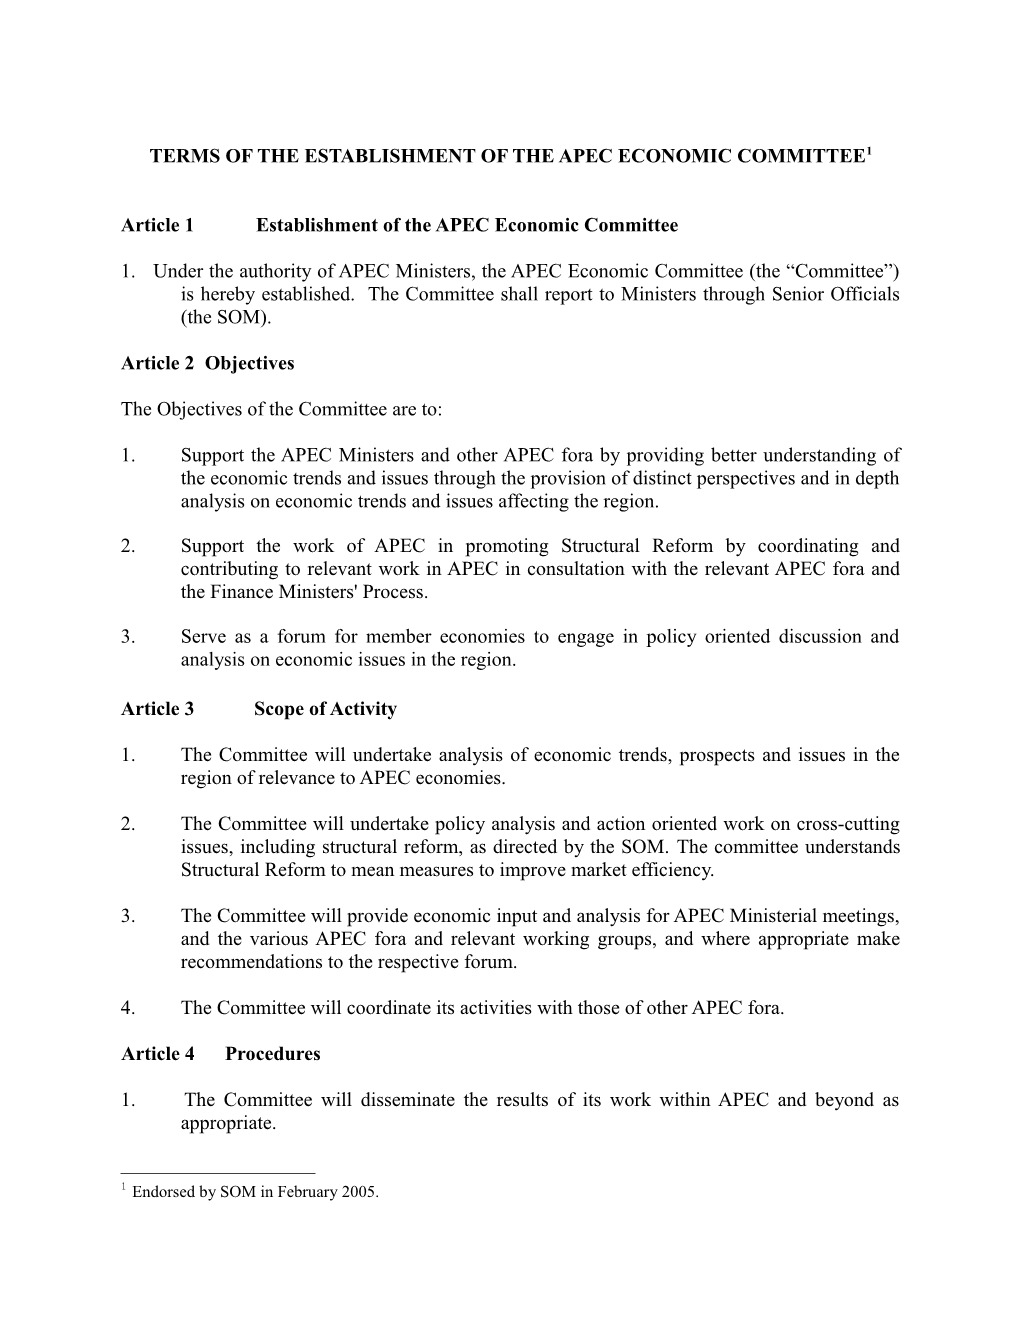 Terms of the Establishment of an Apec Economic Committee